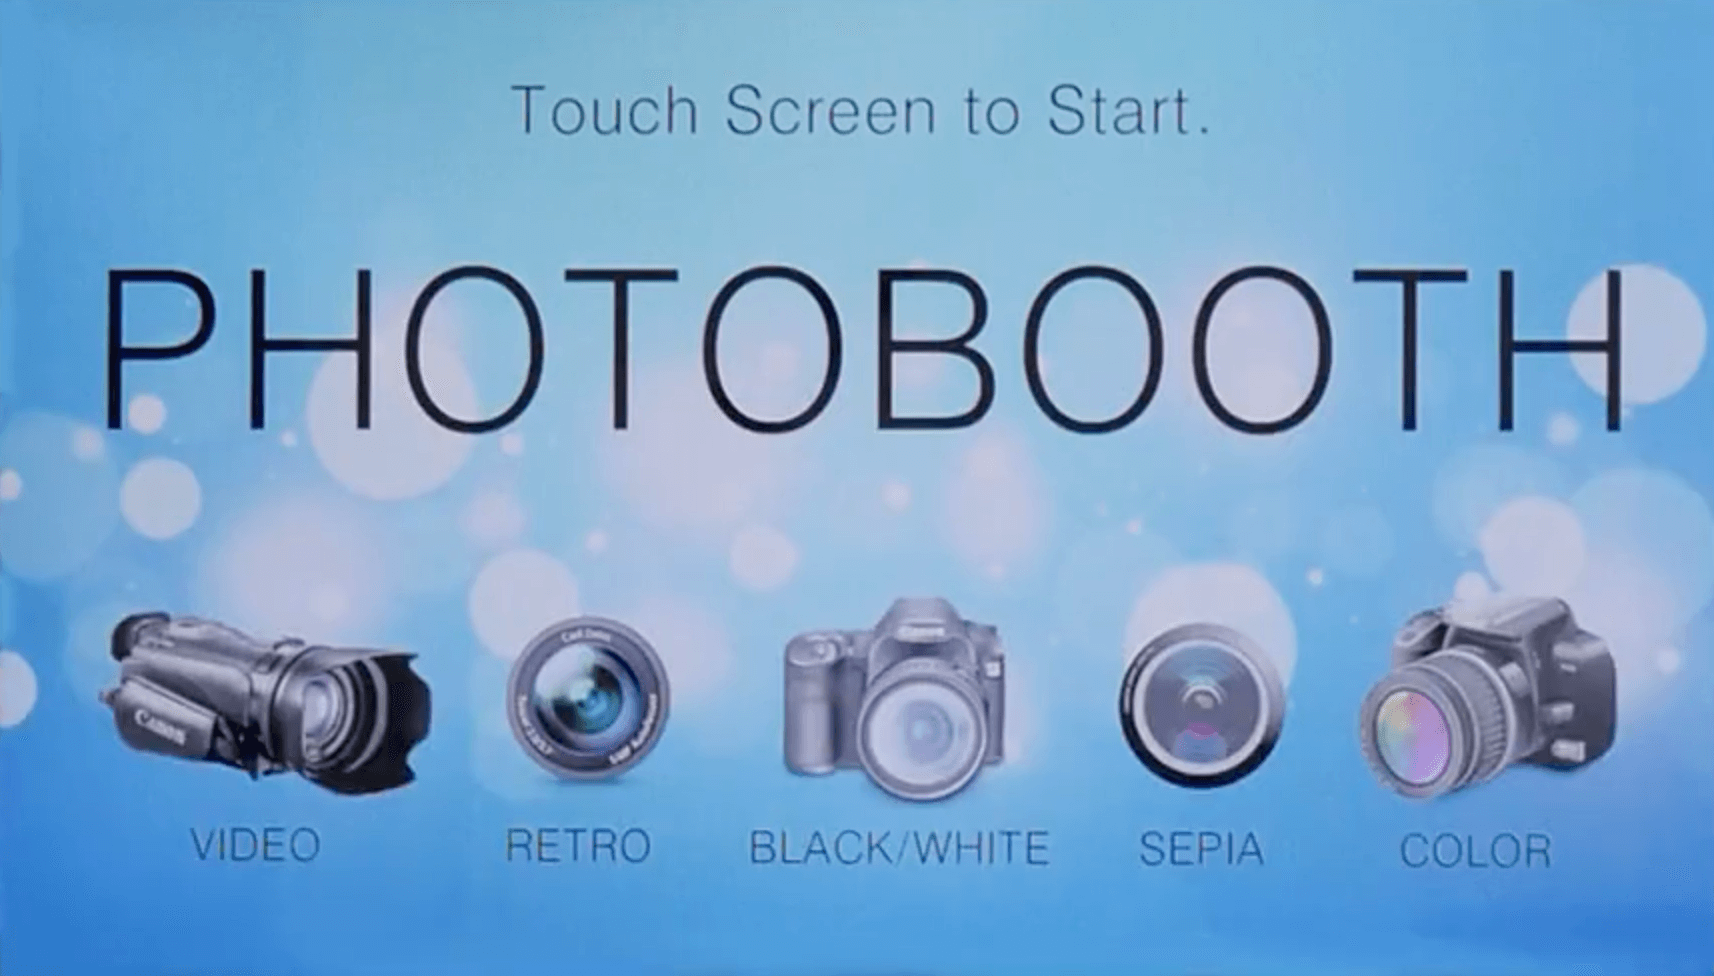 Photo Booth Touch Screen